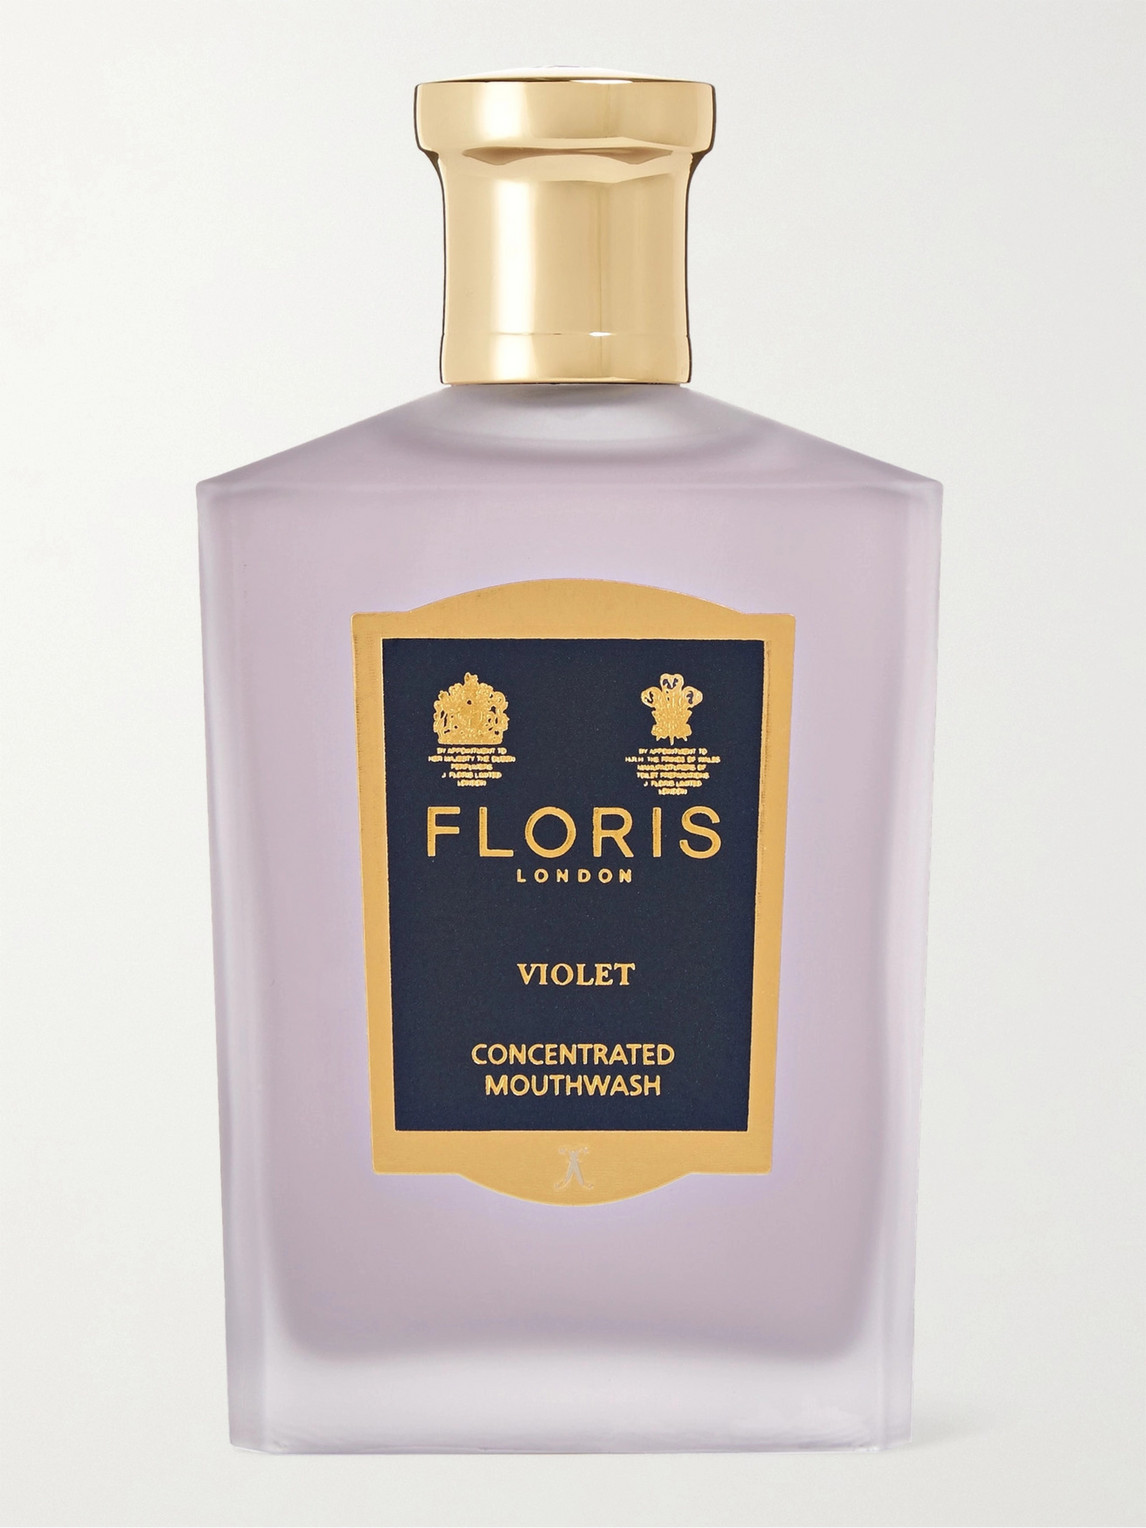 Floris London Violet Concentrated Mouthwash, 100ml In Colourless